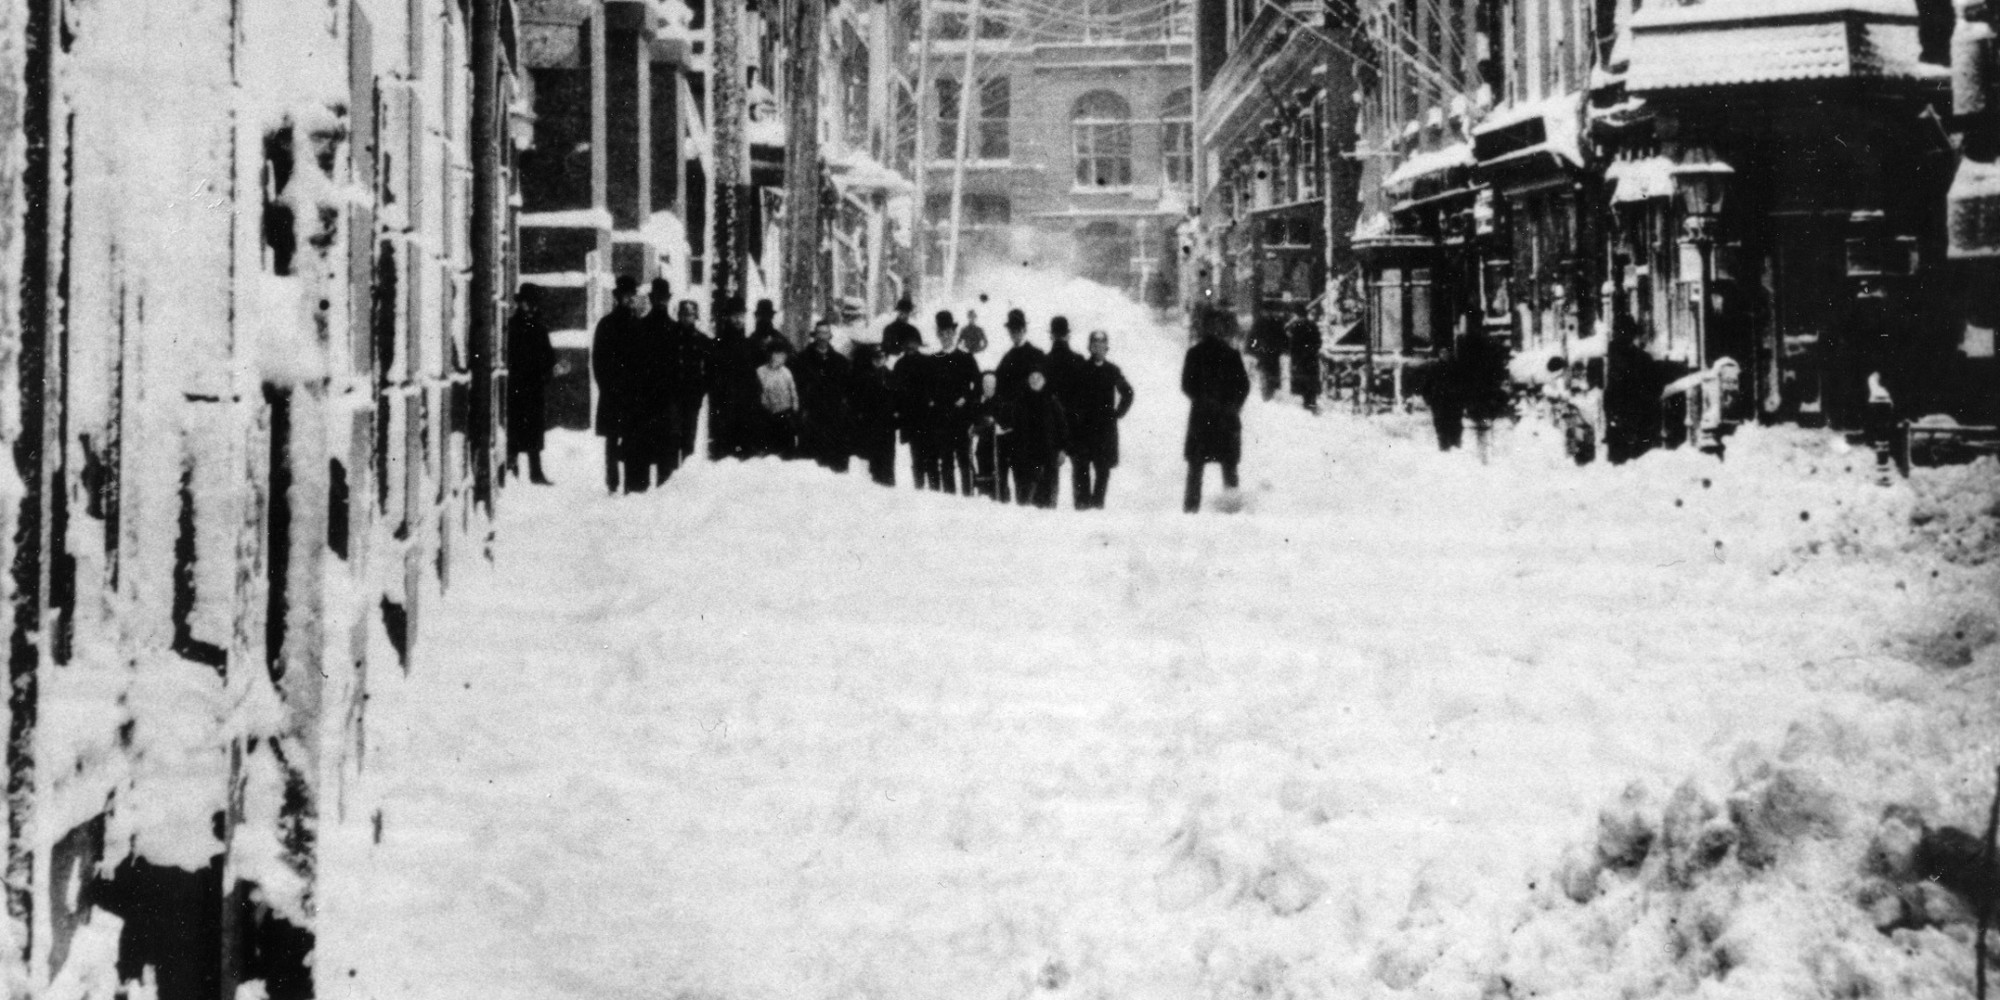 This Is What New York City Of The Past Looked Like Blanketed In Snow2000 x 1000